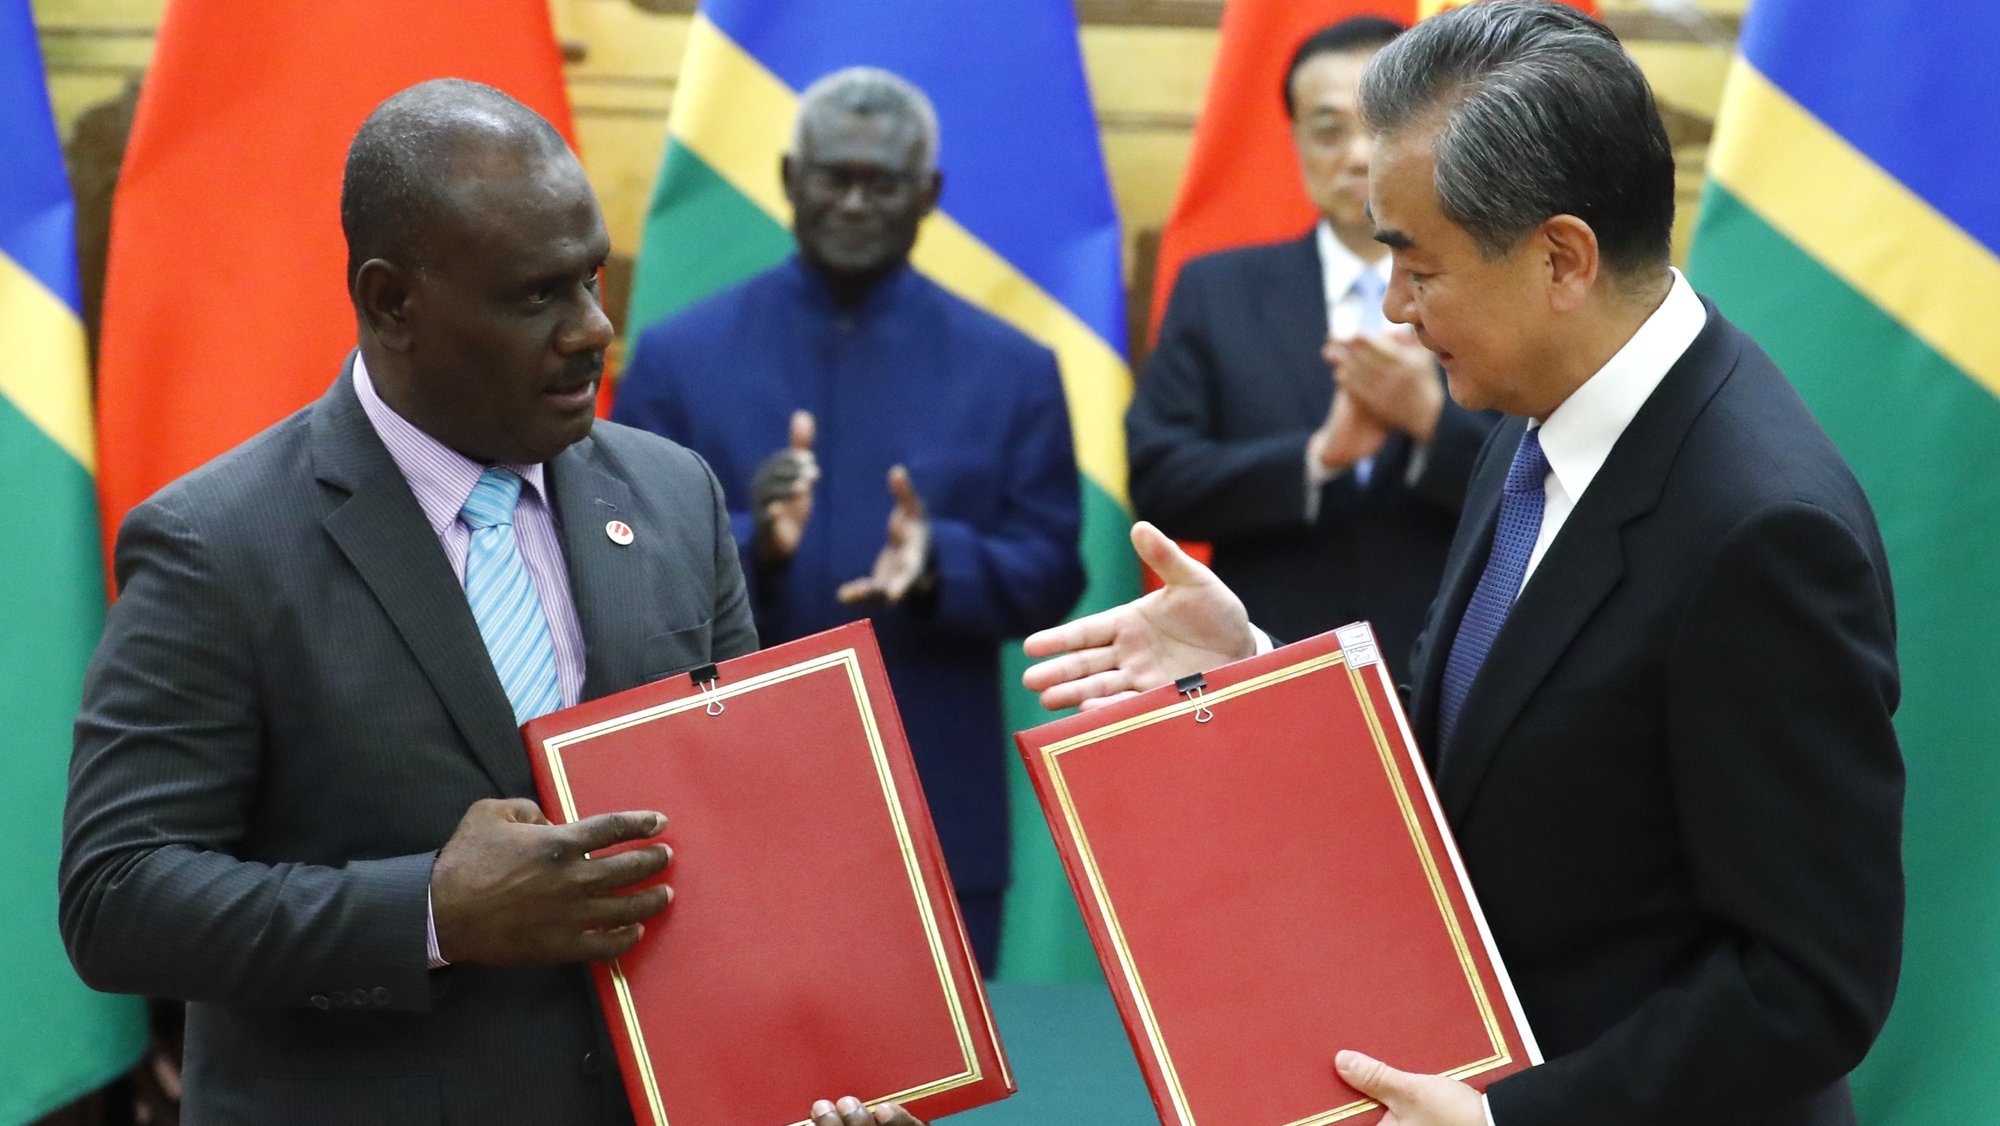 epa07906550 Chinese State Councillor and Foreign Minister Wang Yi (R) and Solomon Islands Foreign Minister Jeremiah Manele (L) attend a signing ceremony at the Great Hall of the People in Beijing, China, 09 October 2019.  EPA/THOMAS PETER / POOL